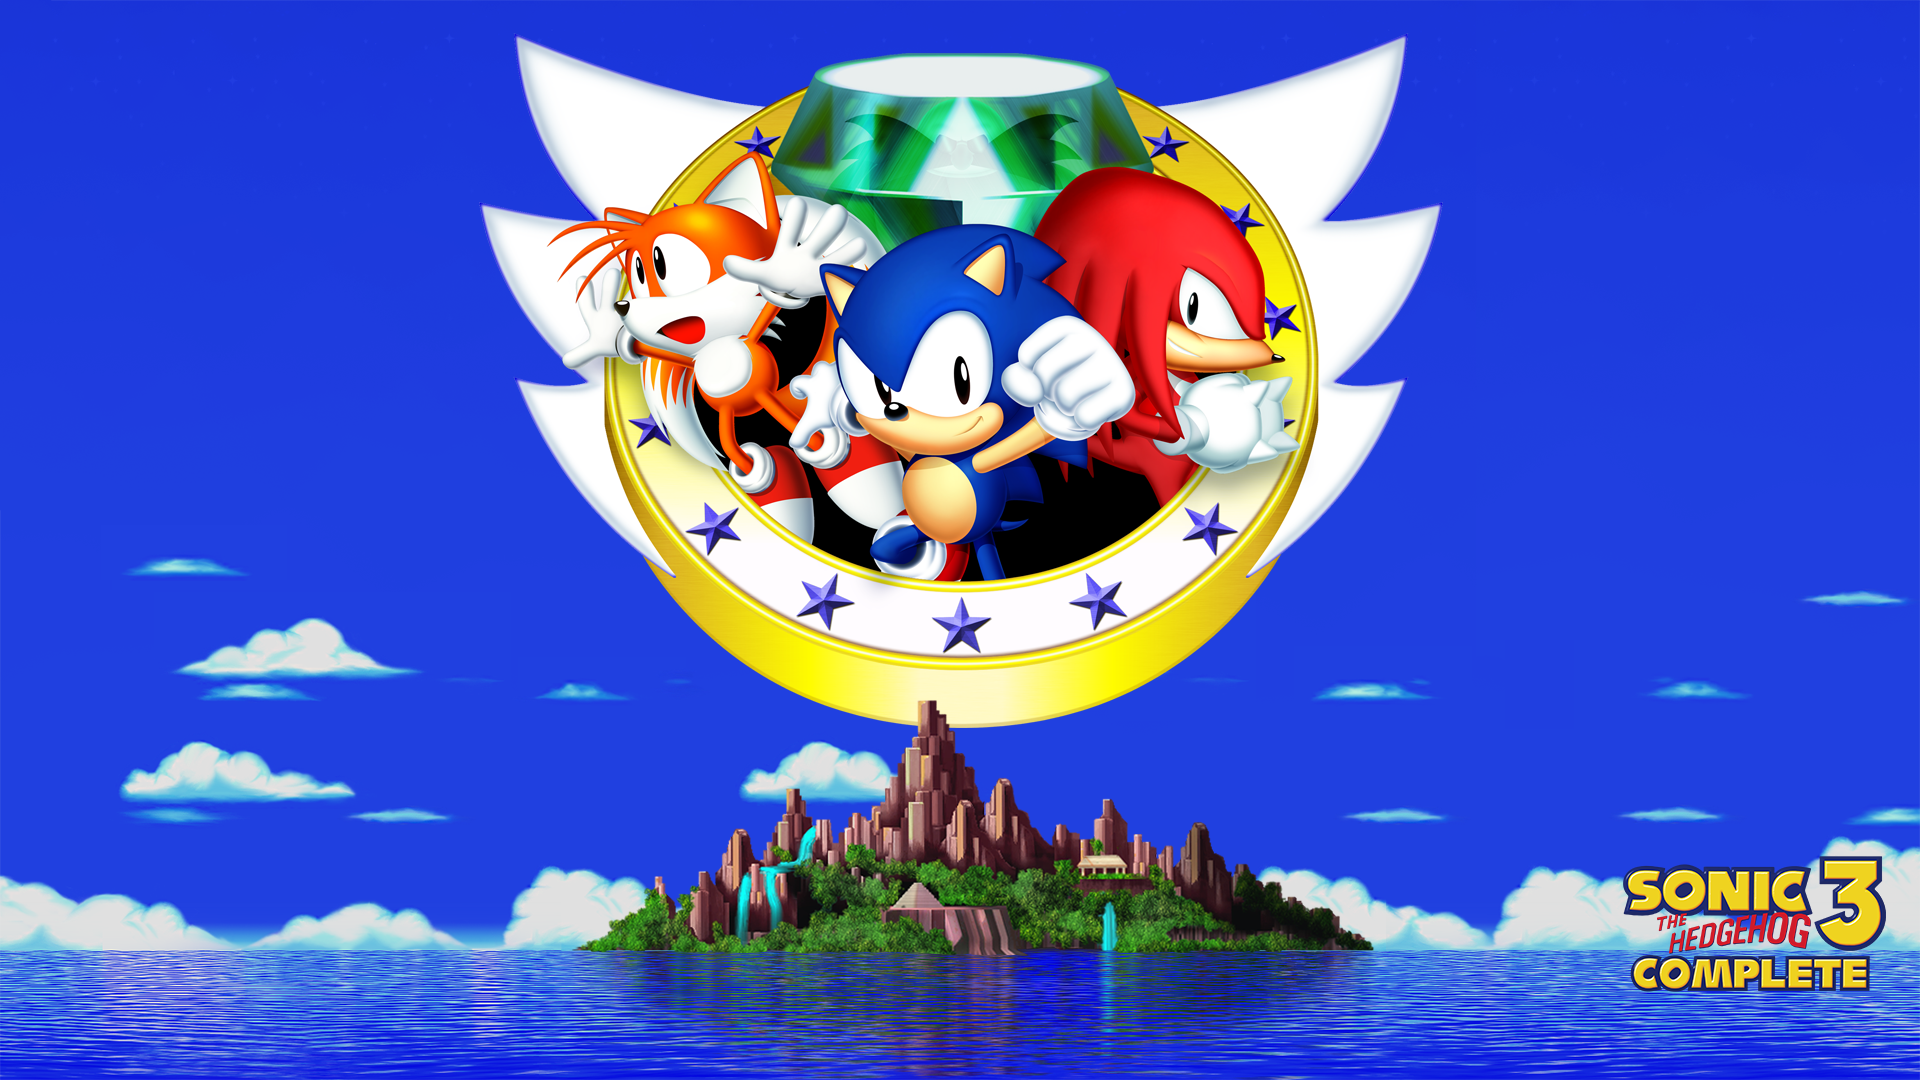 Sonic The Hedgehog 3 Complete